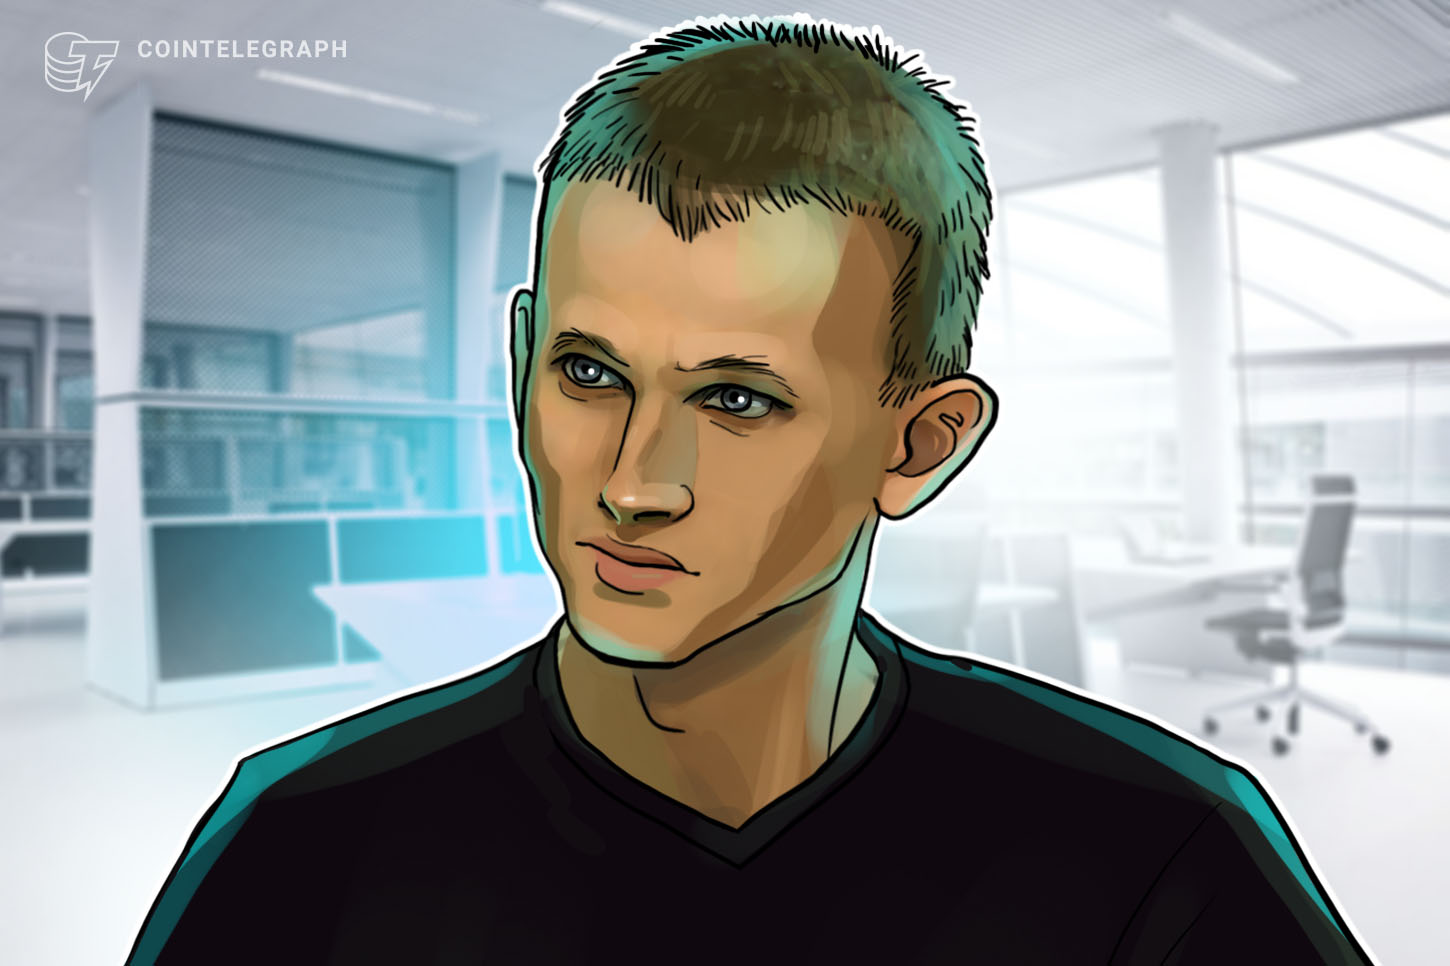 China’s consortium chains might not be trusted internationally, says Vitalik Buterin